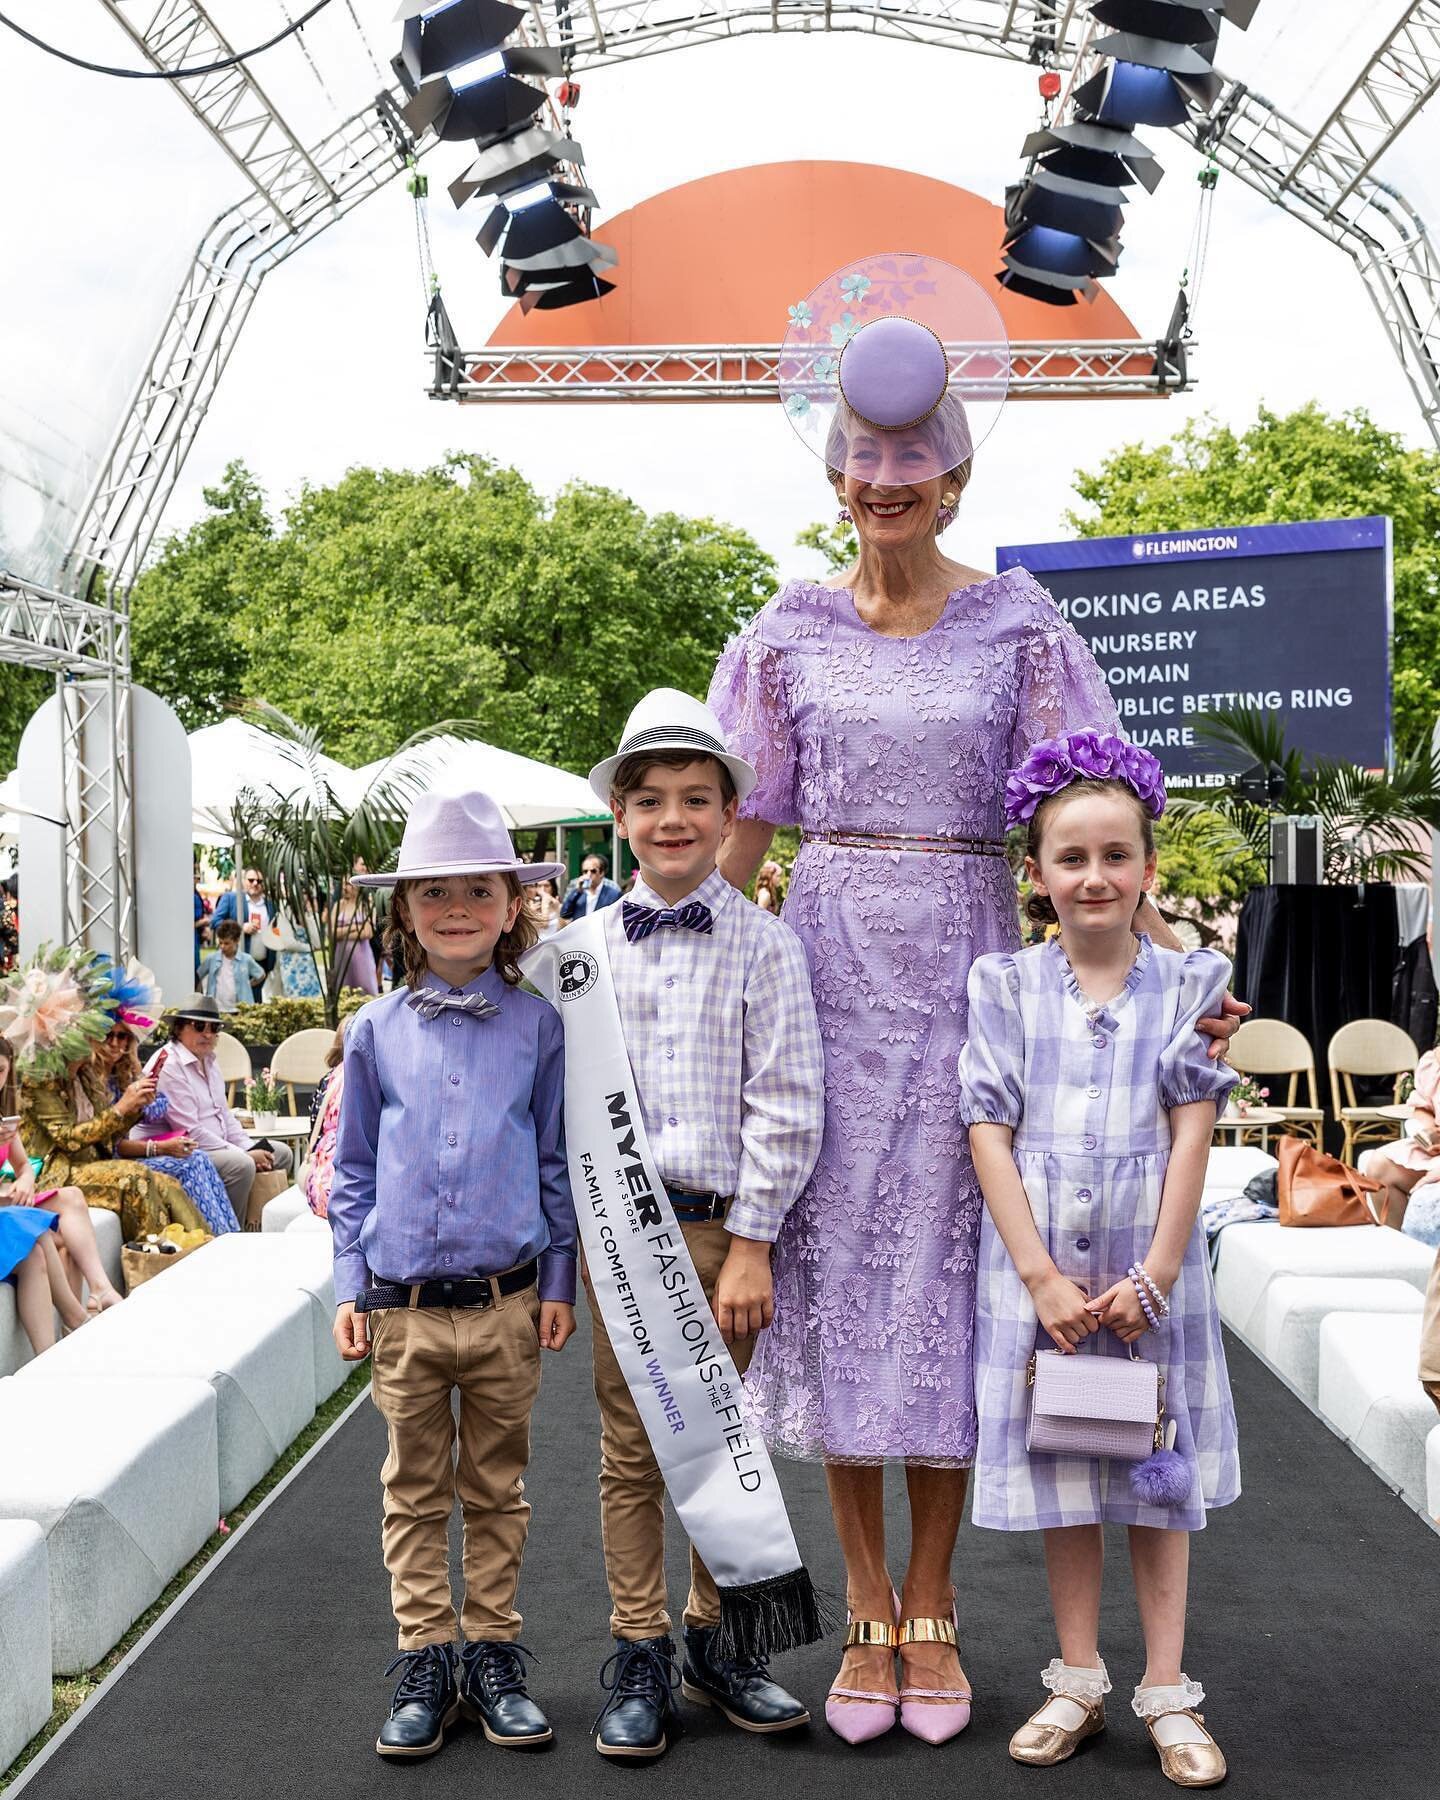 #regram @flemingtonvrc Congratulations to the winners and runners up of the Myer Fashion on The Field Family Competition! 

Cuteness overload 🥰 

#ThePark #FOTF #StakesDay
#myerfotf #racewear #racingfashion #racingstyle #flemingtonvrc #millinery #ha